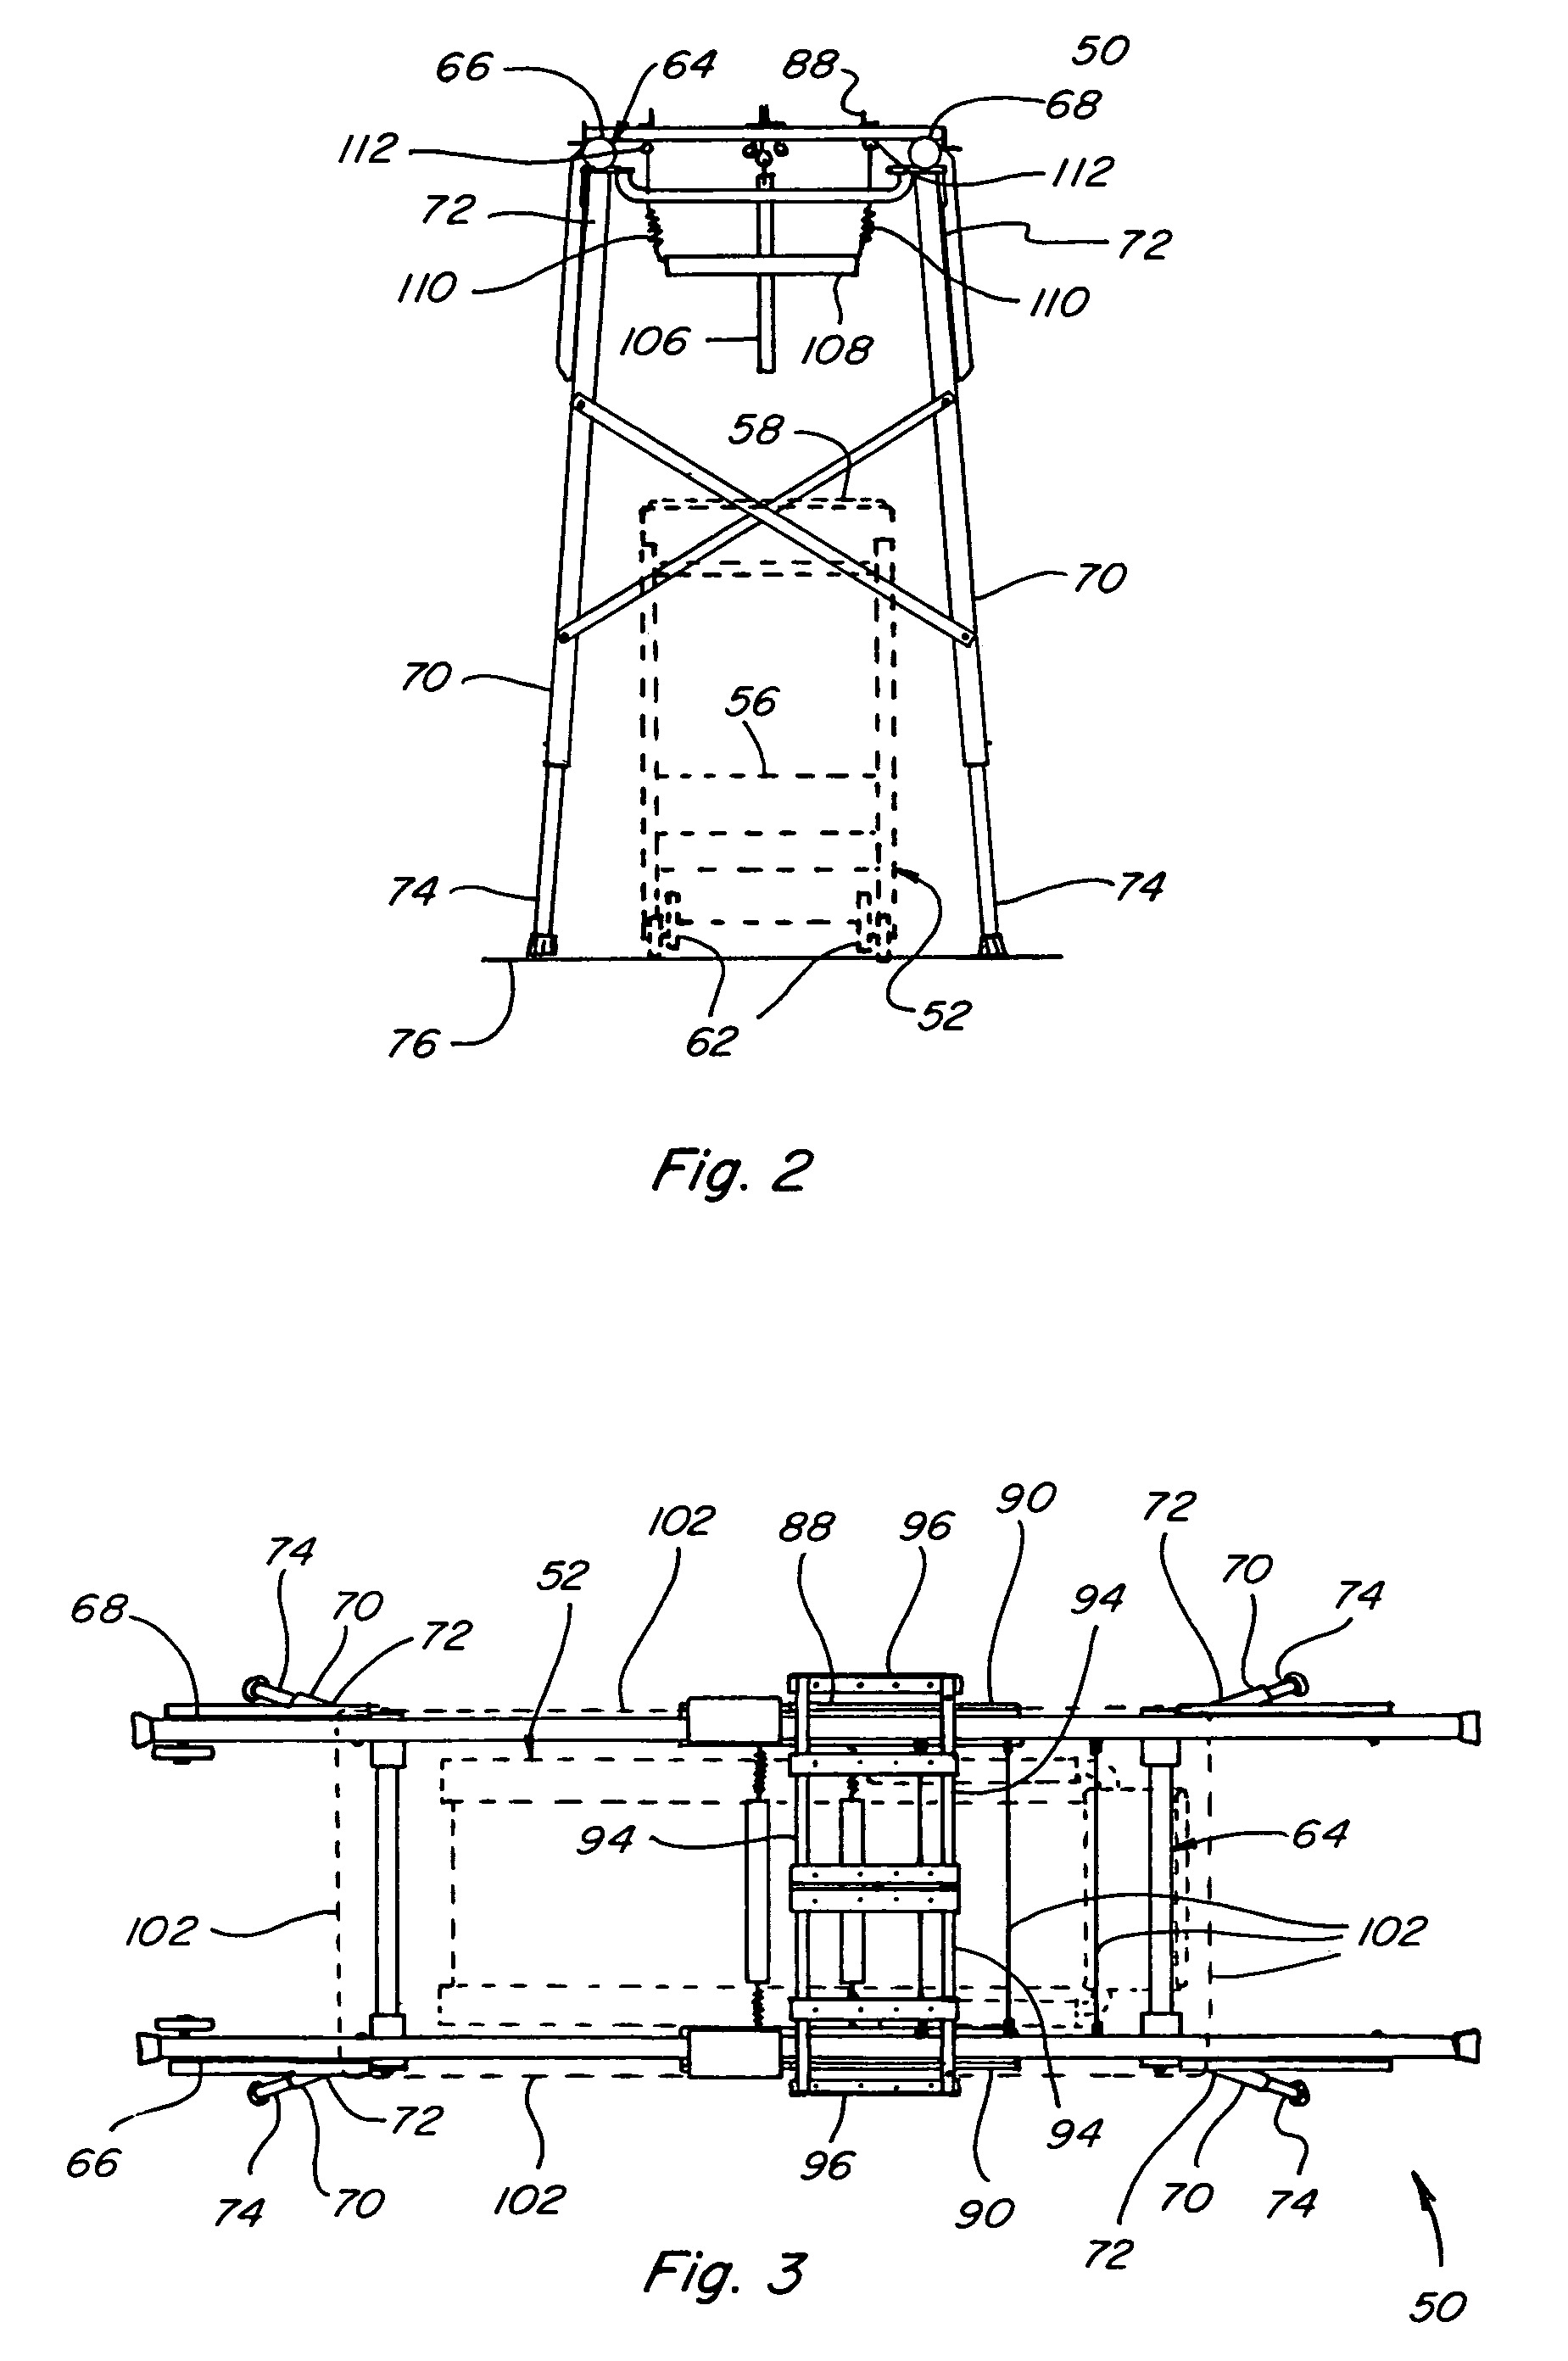 Variable unweighting and resistance training and stretching apparatus for use with a cardiovascular or other exercise device